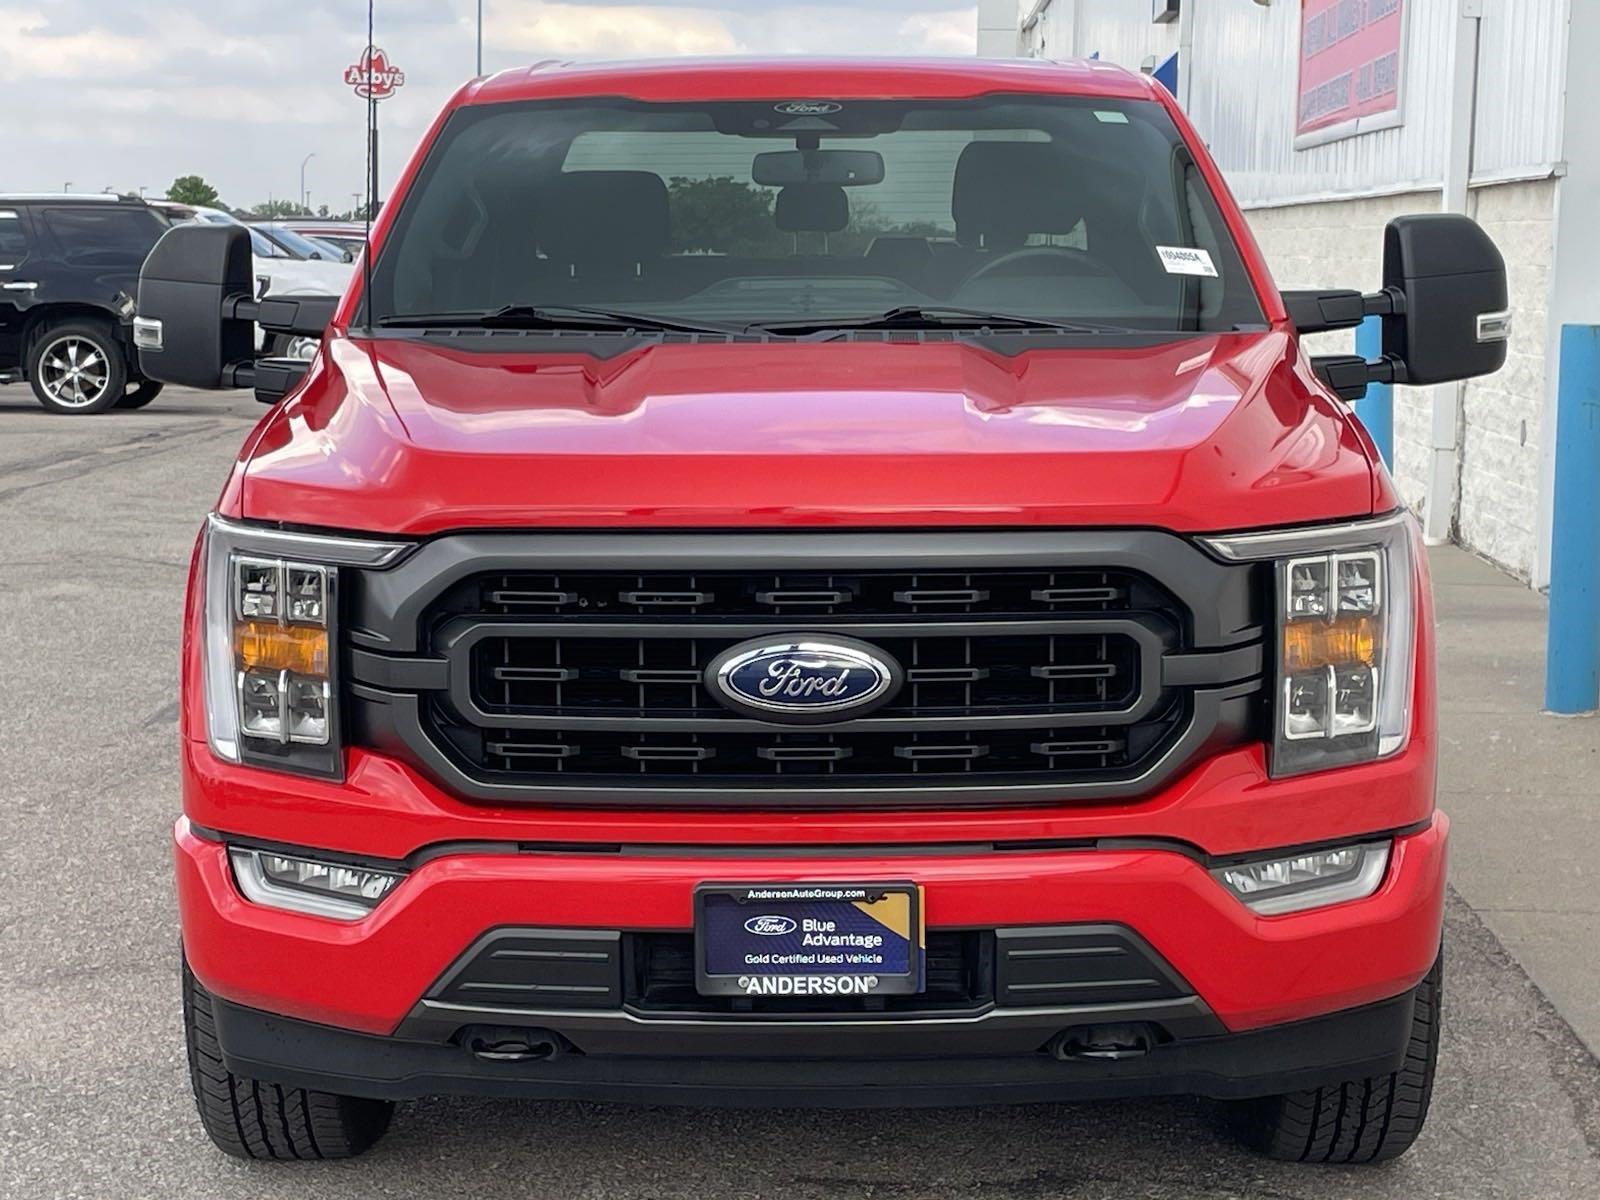 Used 2021 Ford F-150 XLT SuperCrew Cab Styleside for sale in Lincoln NE